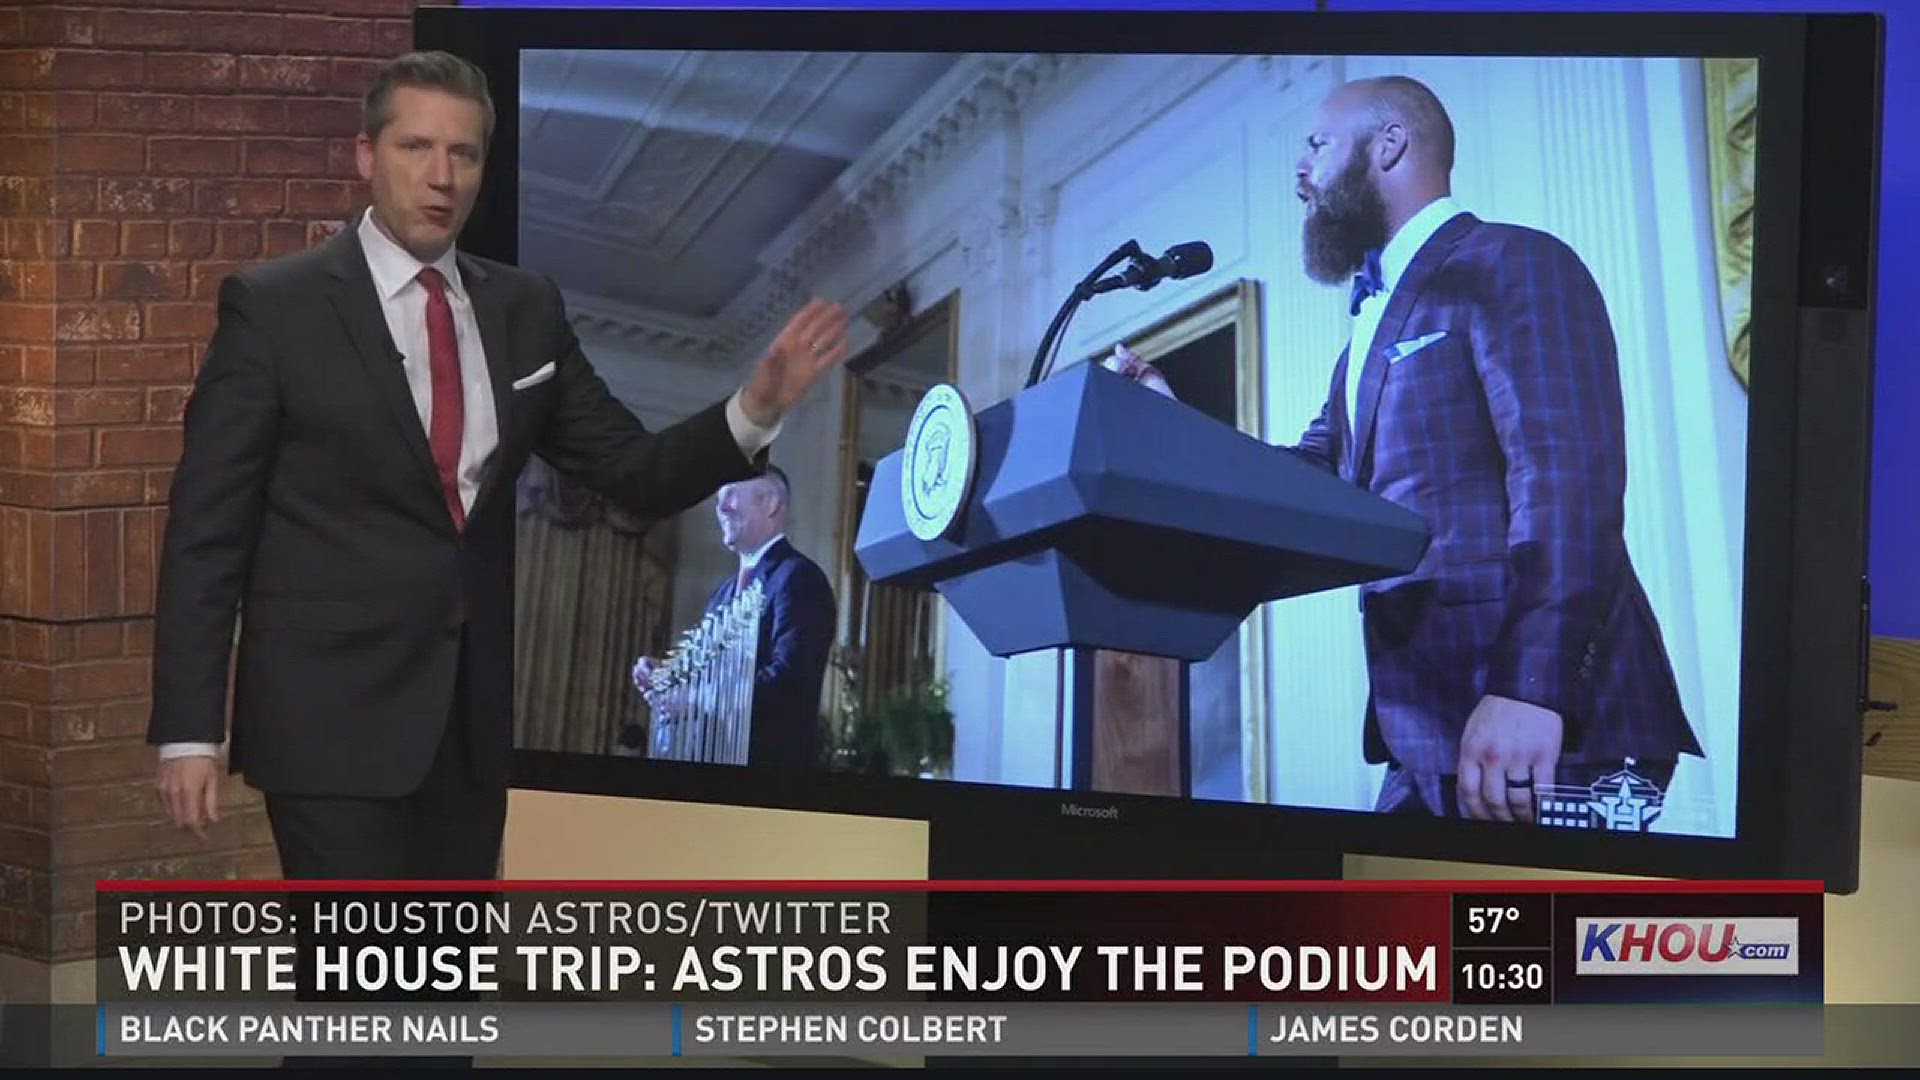 The Houston Astros got to enjoy some time at the podium during their visit to the White House.